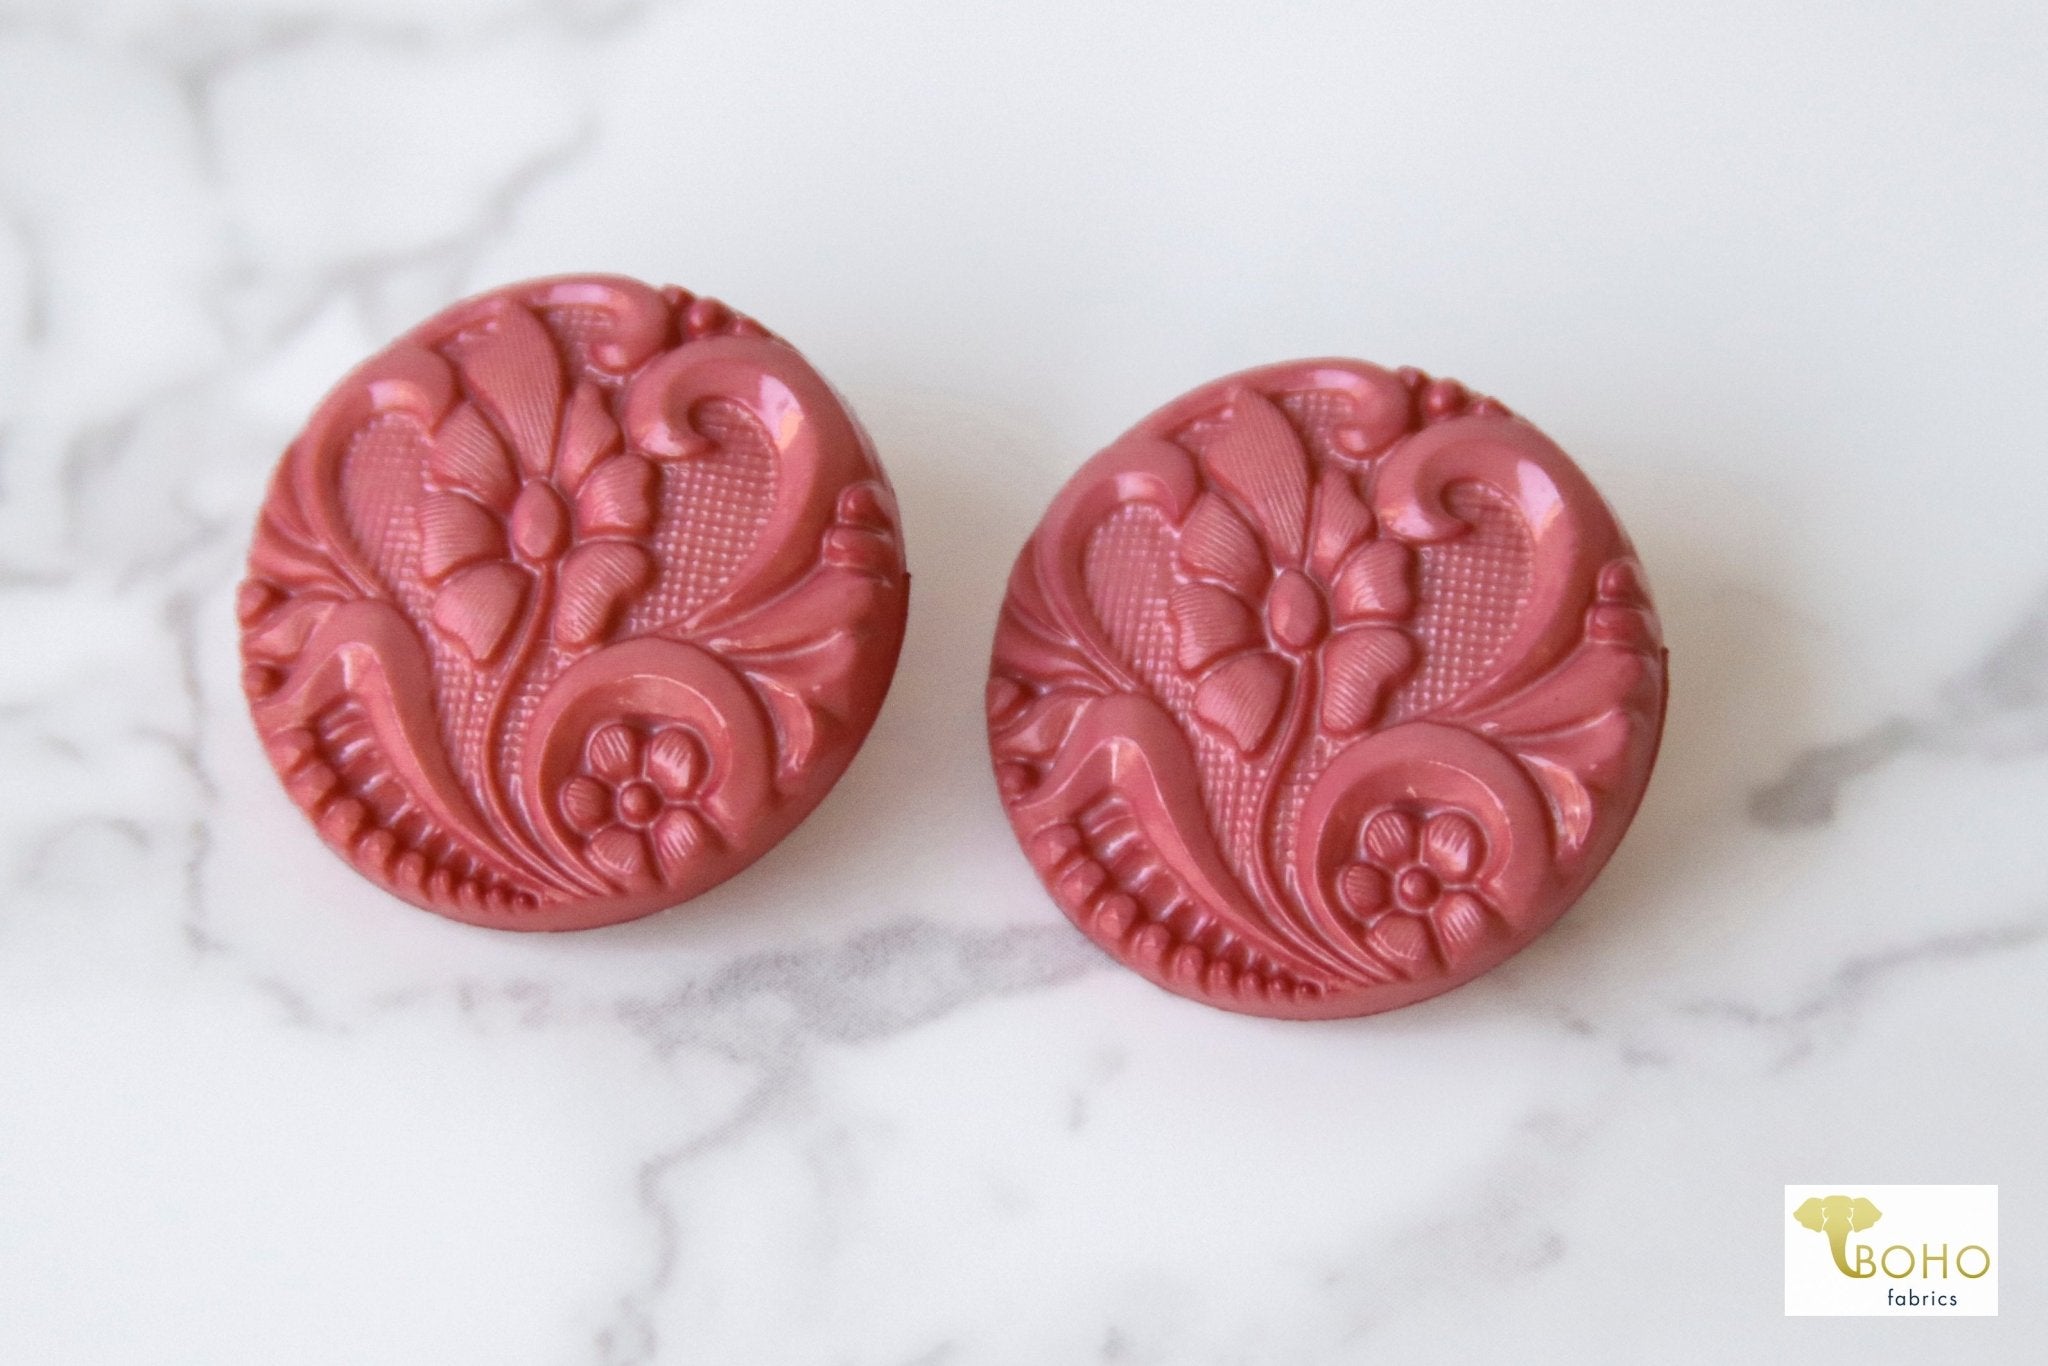 Dusty Rose, Art Nouveau Florals, Shank Buttons. Available in 15mm, 18mm, 20mm, 25.5mm - Boho Fabrics